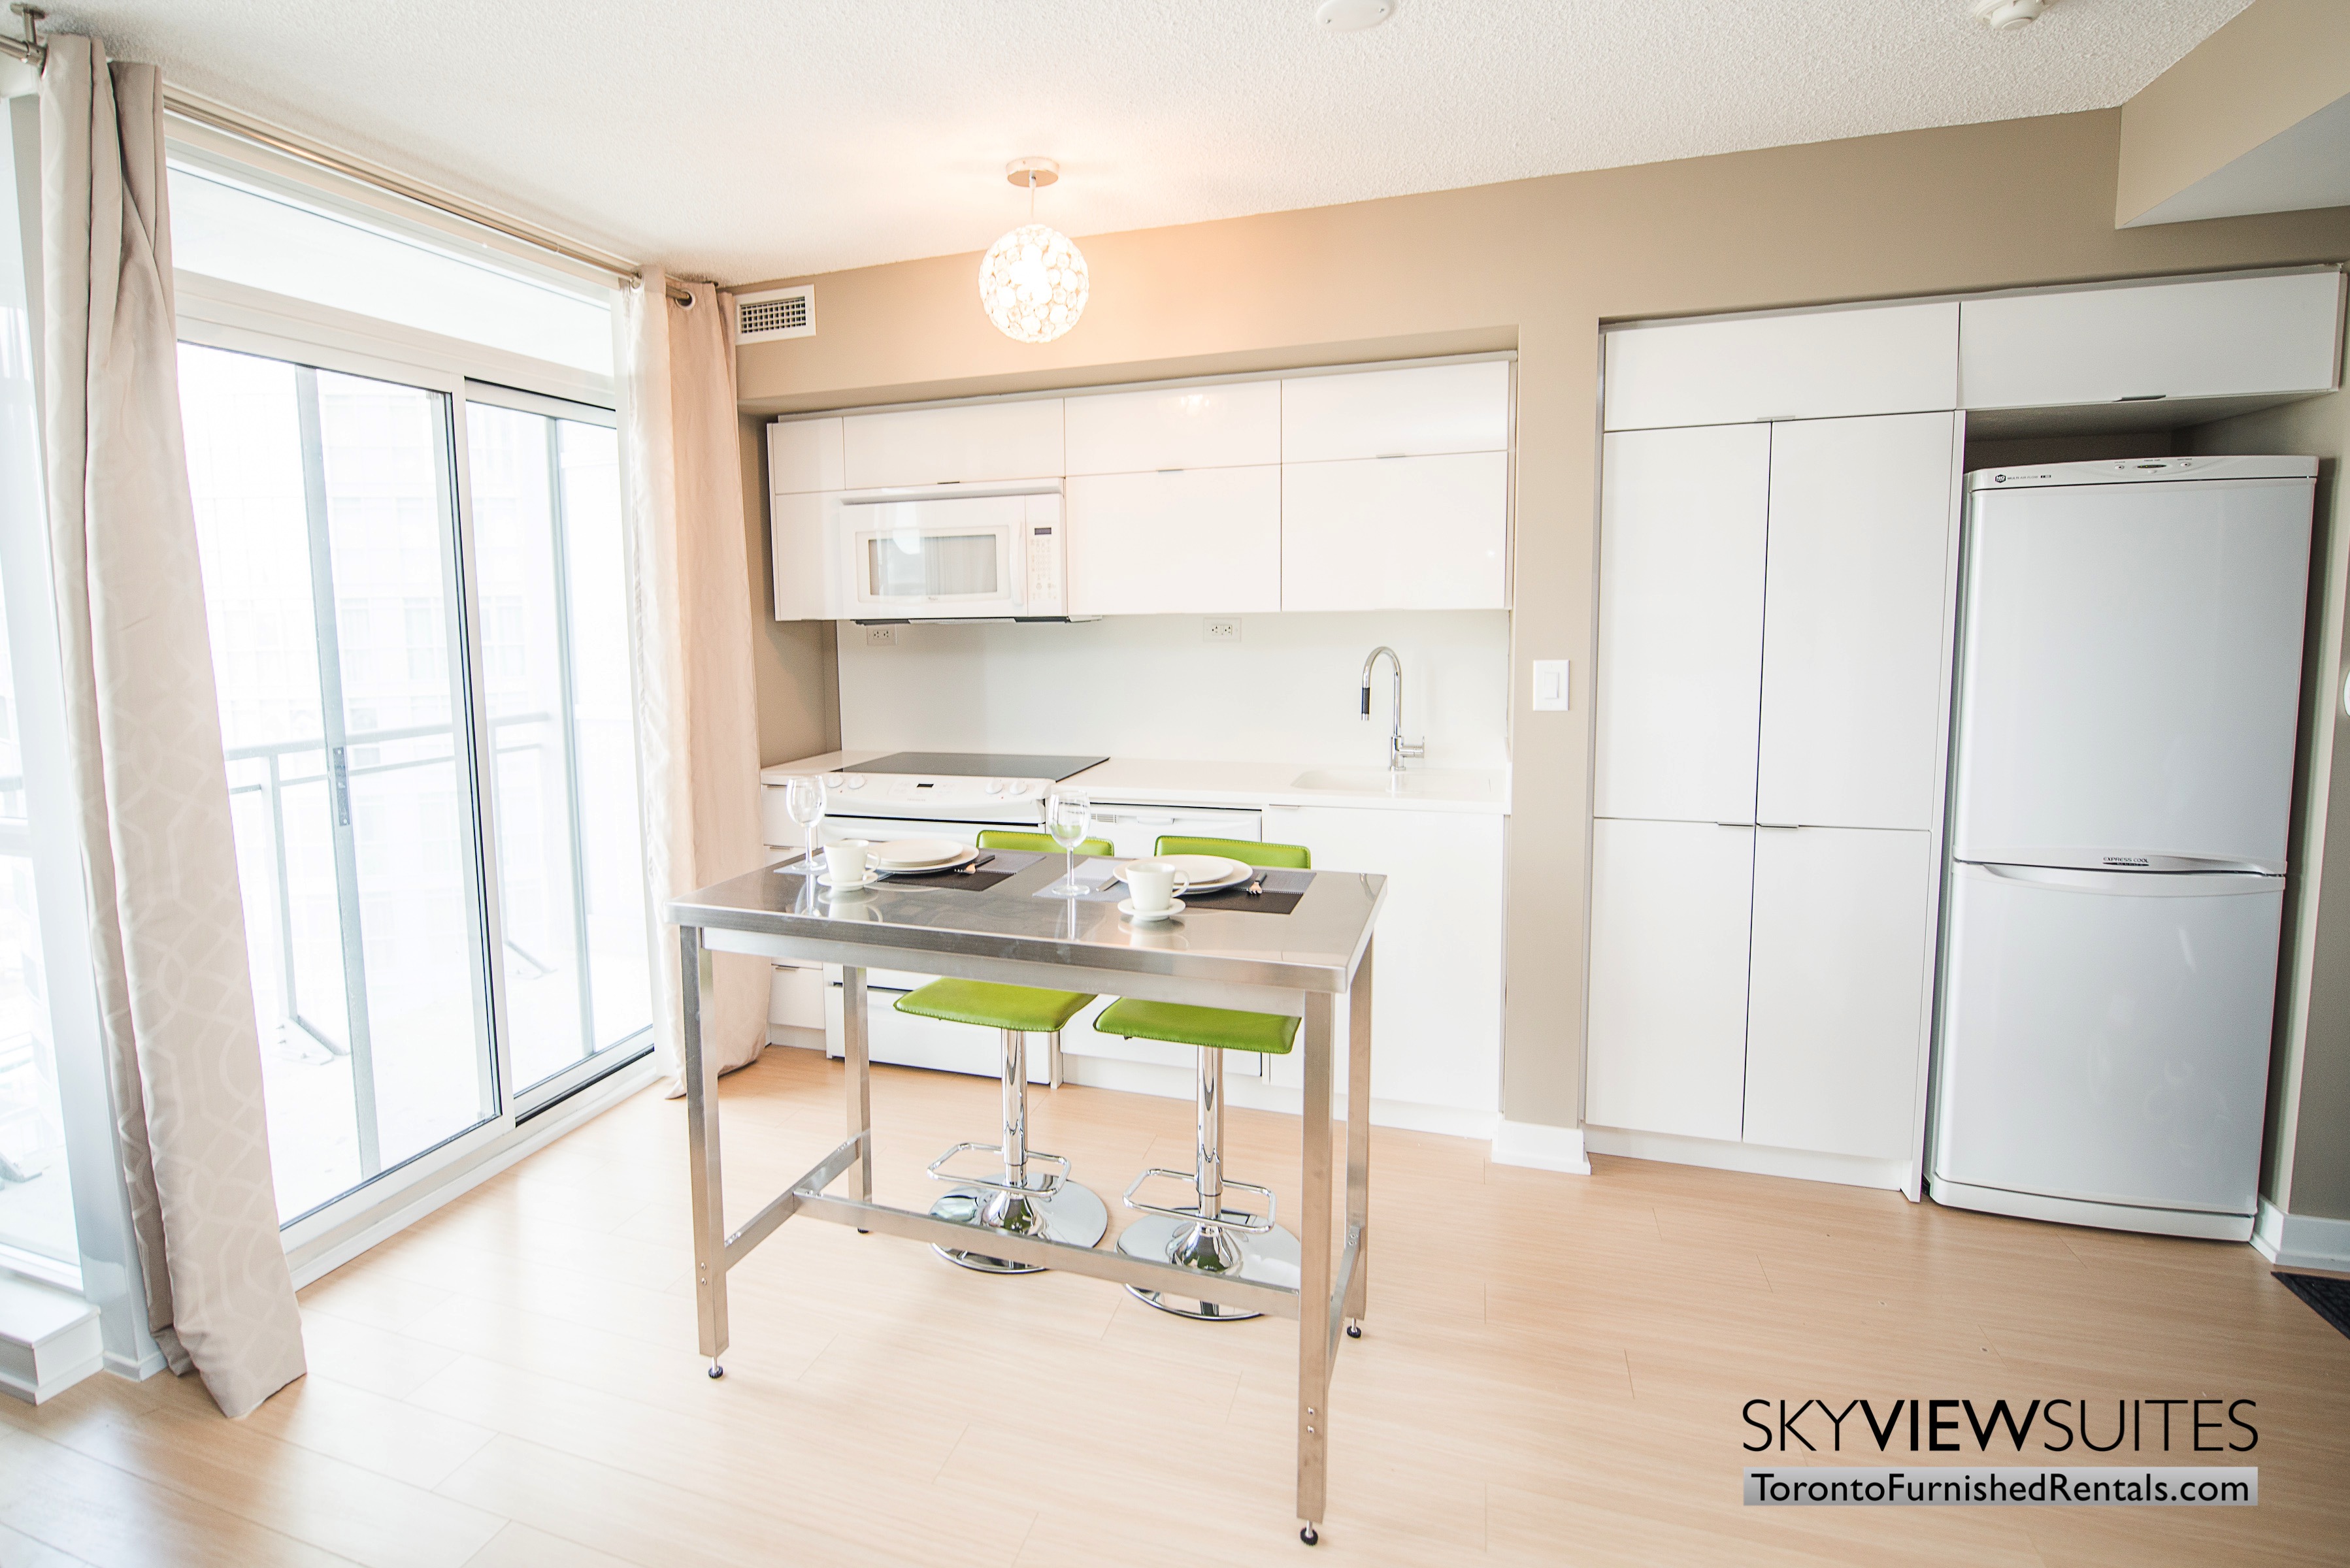 furnished apartments toronto parade kitchen and dining table